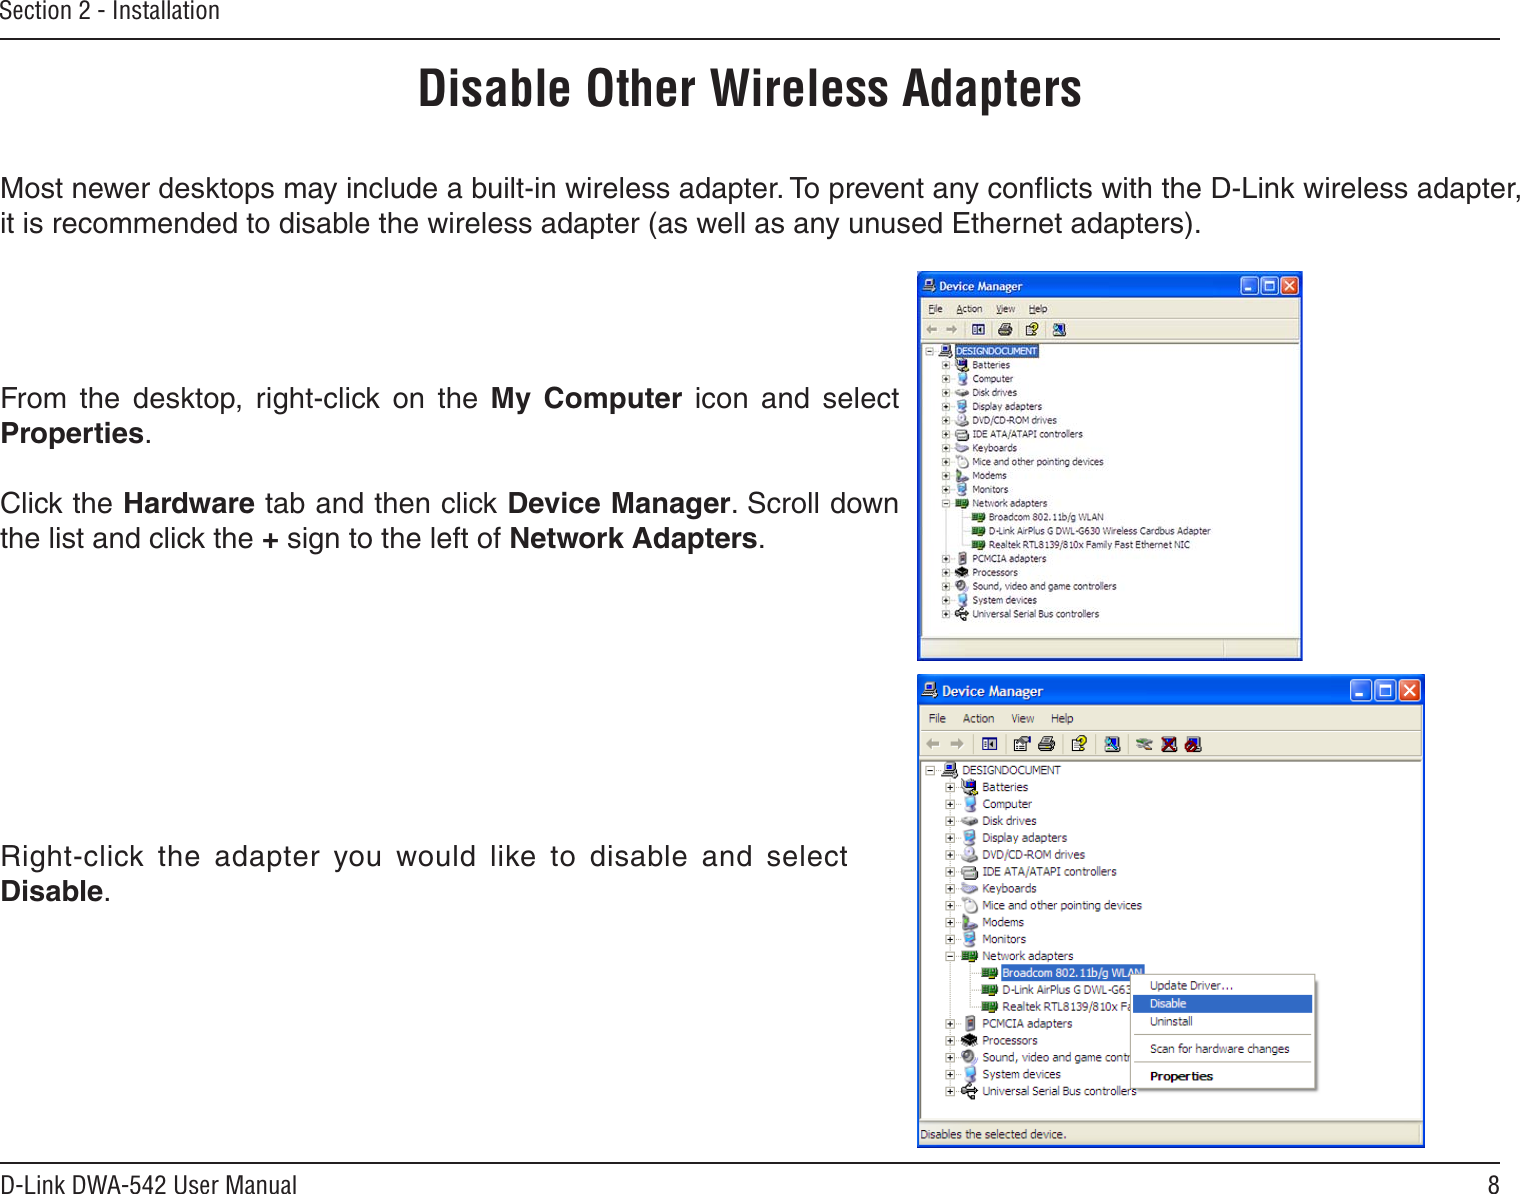 8D-Link DWA-542 User ManualSection 2 - InstallationDisable Other Wireless AdaptersMost newer desktops may include a built-in wireless adapter. To prevent any conﬂicts with the D-Link wireless adapter, it is recommended to disable the wireless adapter (as well as any unused Ethernet adapters).From  the  desktop,  right-click  on  the  My  Computer  icon  and  select Properties. Click the Hardware tab and then click Device Manager. Scroll down the list and click the + sign to the left of Network Adapters.Right-click  the  adapter  you  would  like  to  disable  and  select Disable.